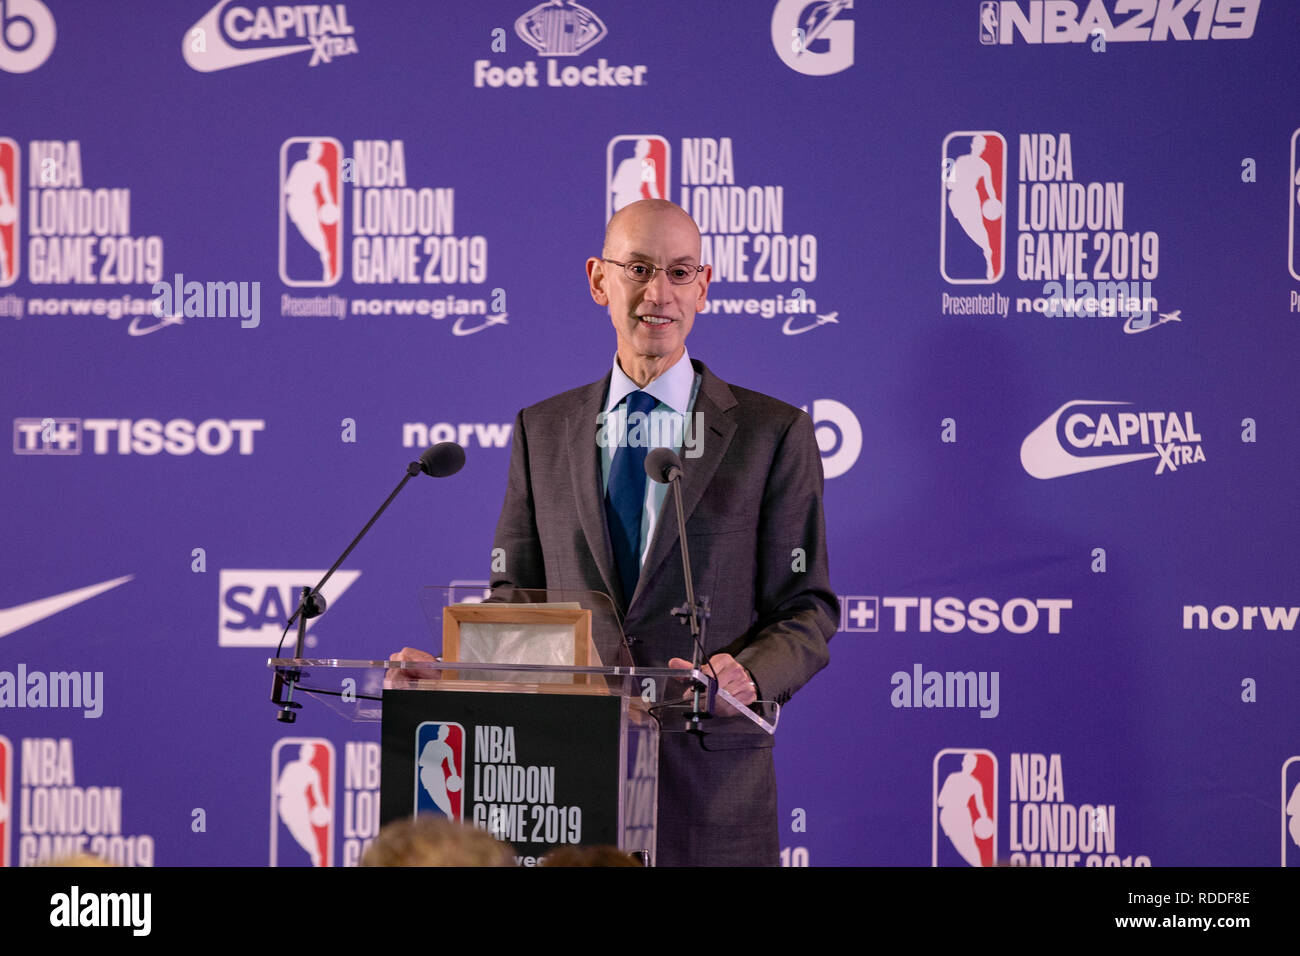 London, UK. 17th Jan 2019. NBA Commissioner Adam Silver Gives a press conference before the  London Game 2019 Washington Wizards vs. New York Knicks at the O2 Arena, Uk, Credit: Jason Richardson/Alamy Live News Stock Photo